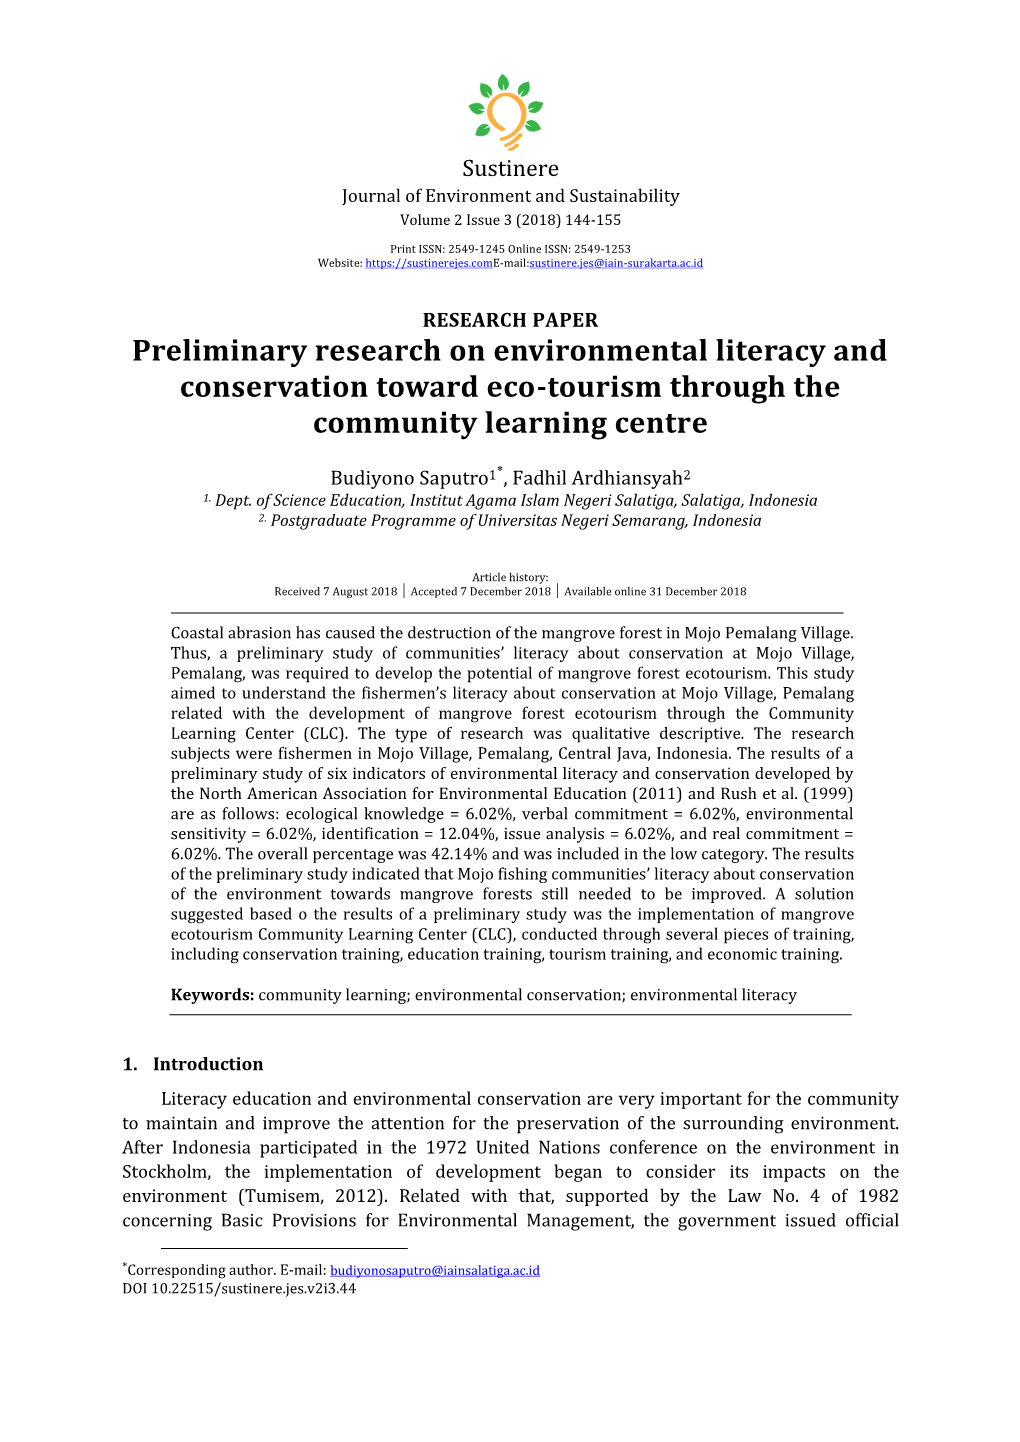 Preliminary Research on Environmental Literacy and Conservation Toward Eco-Tourism Through the Community Learning Centre